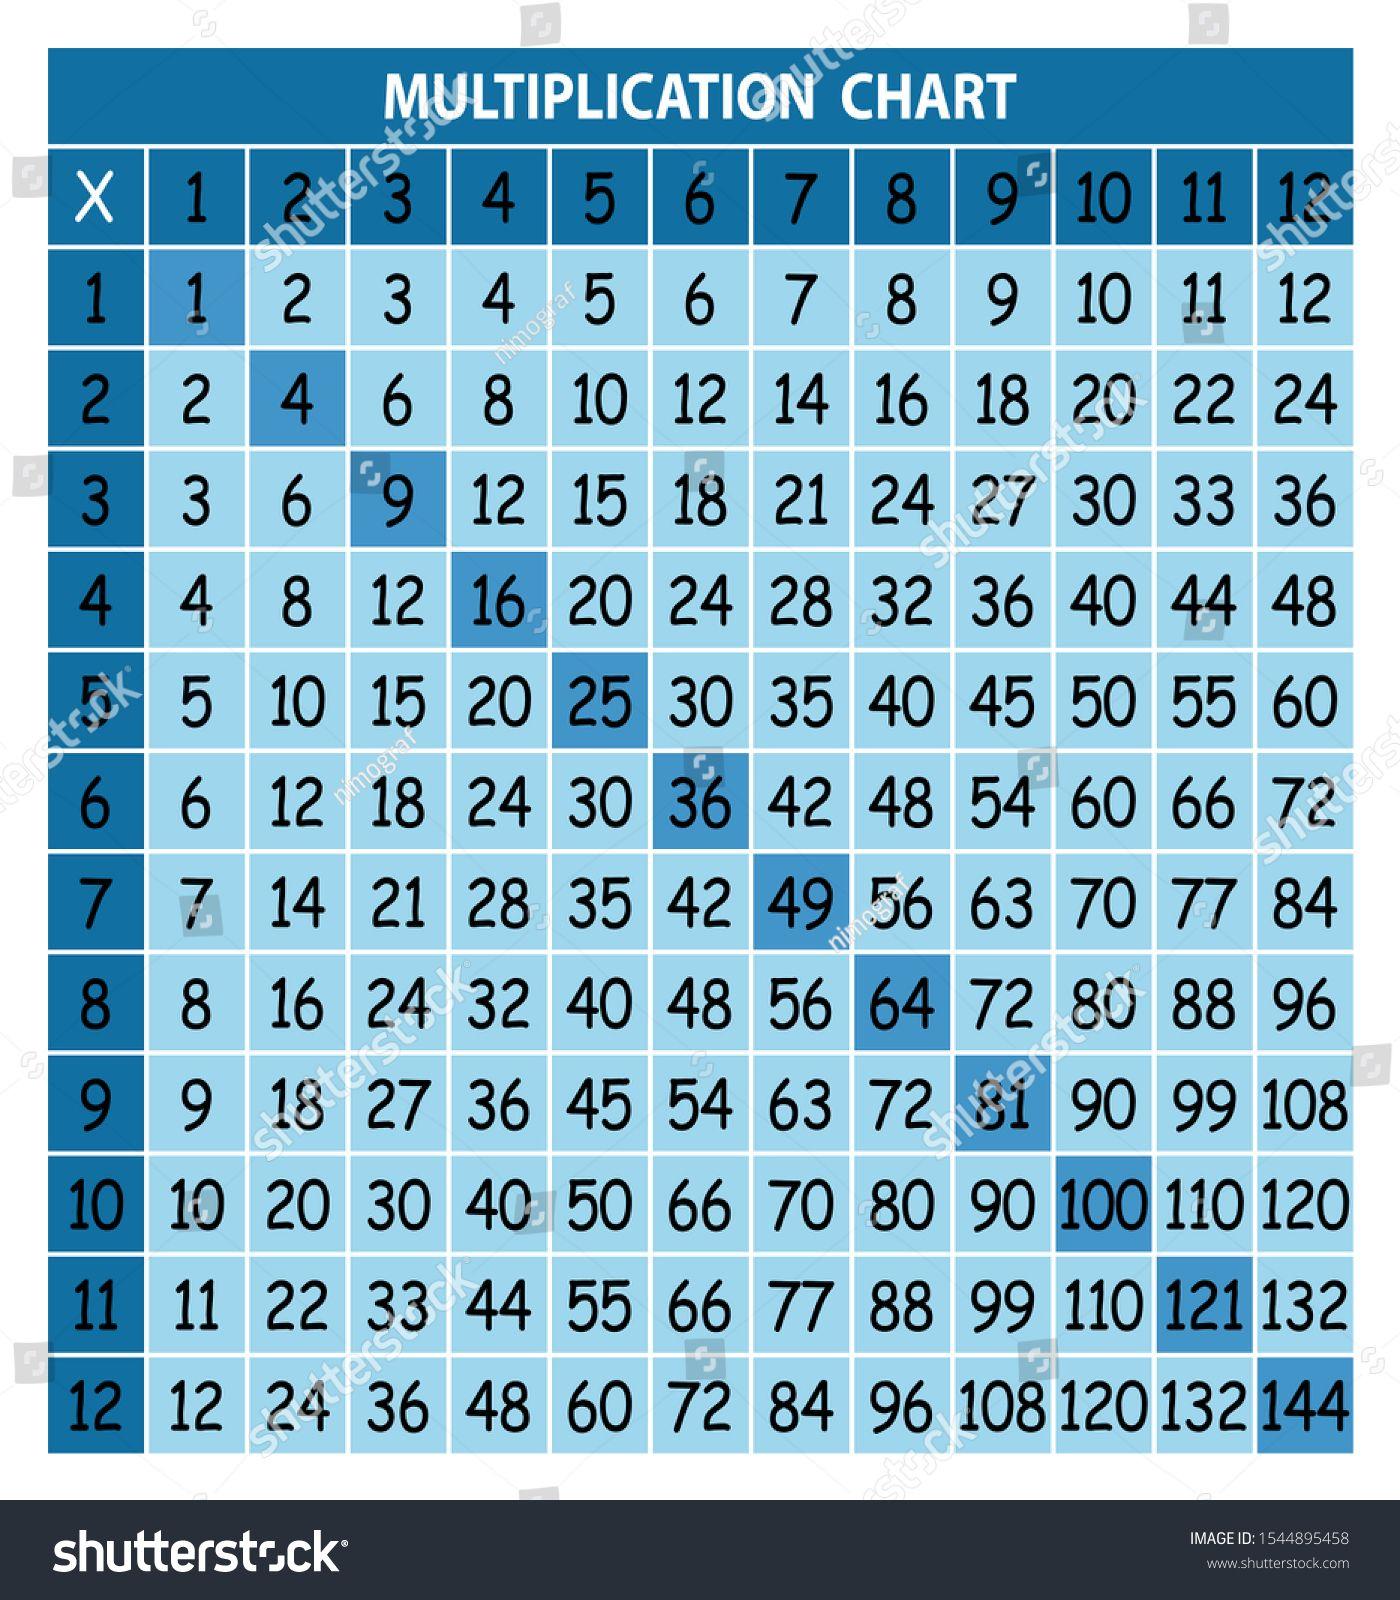 Multiplication Chart For Education. Colorful Multiplication